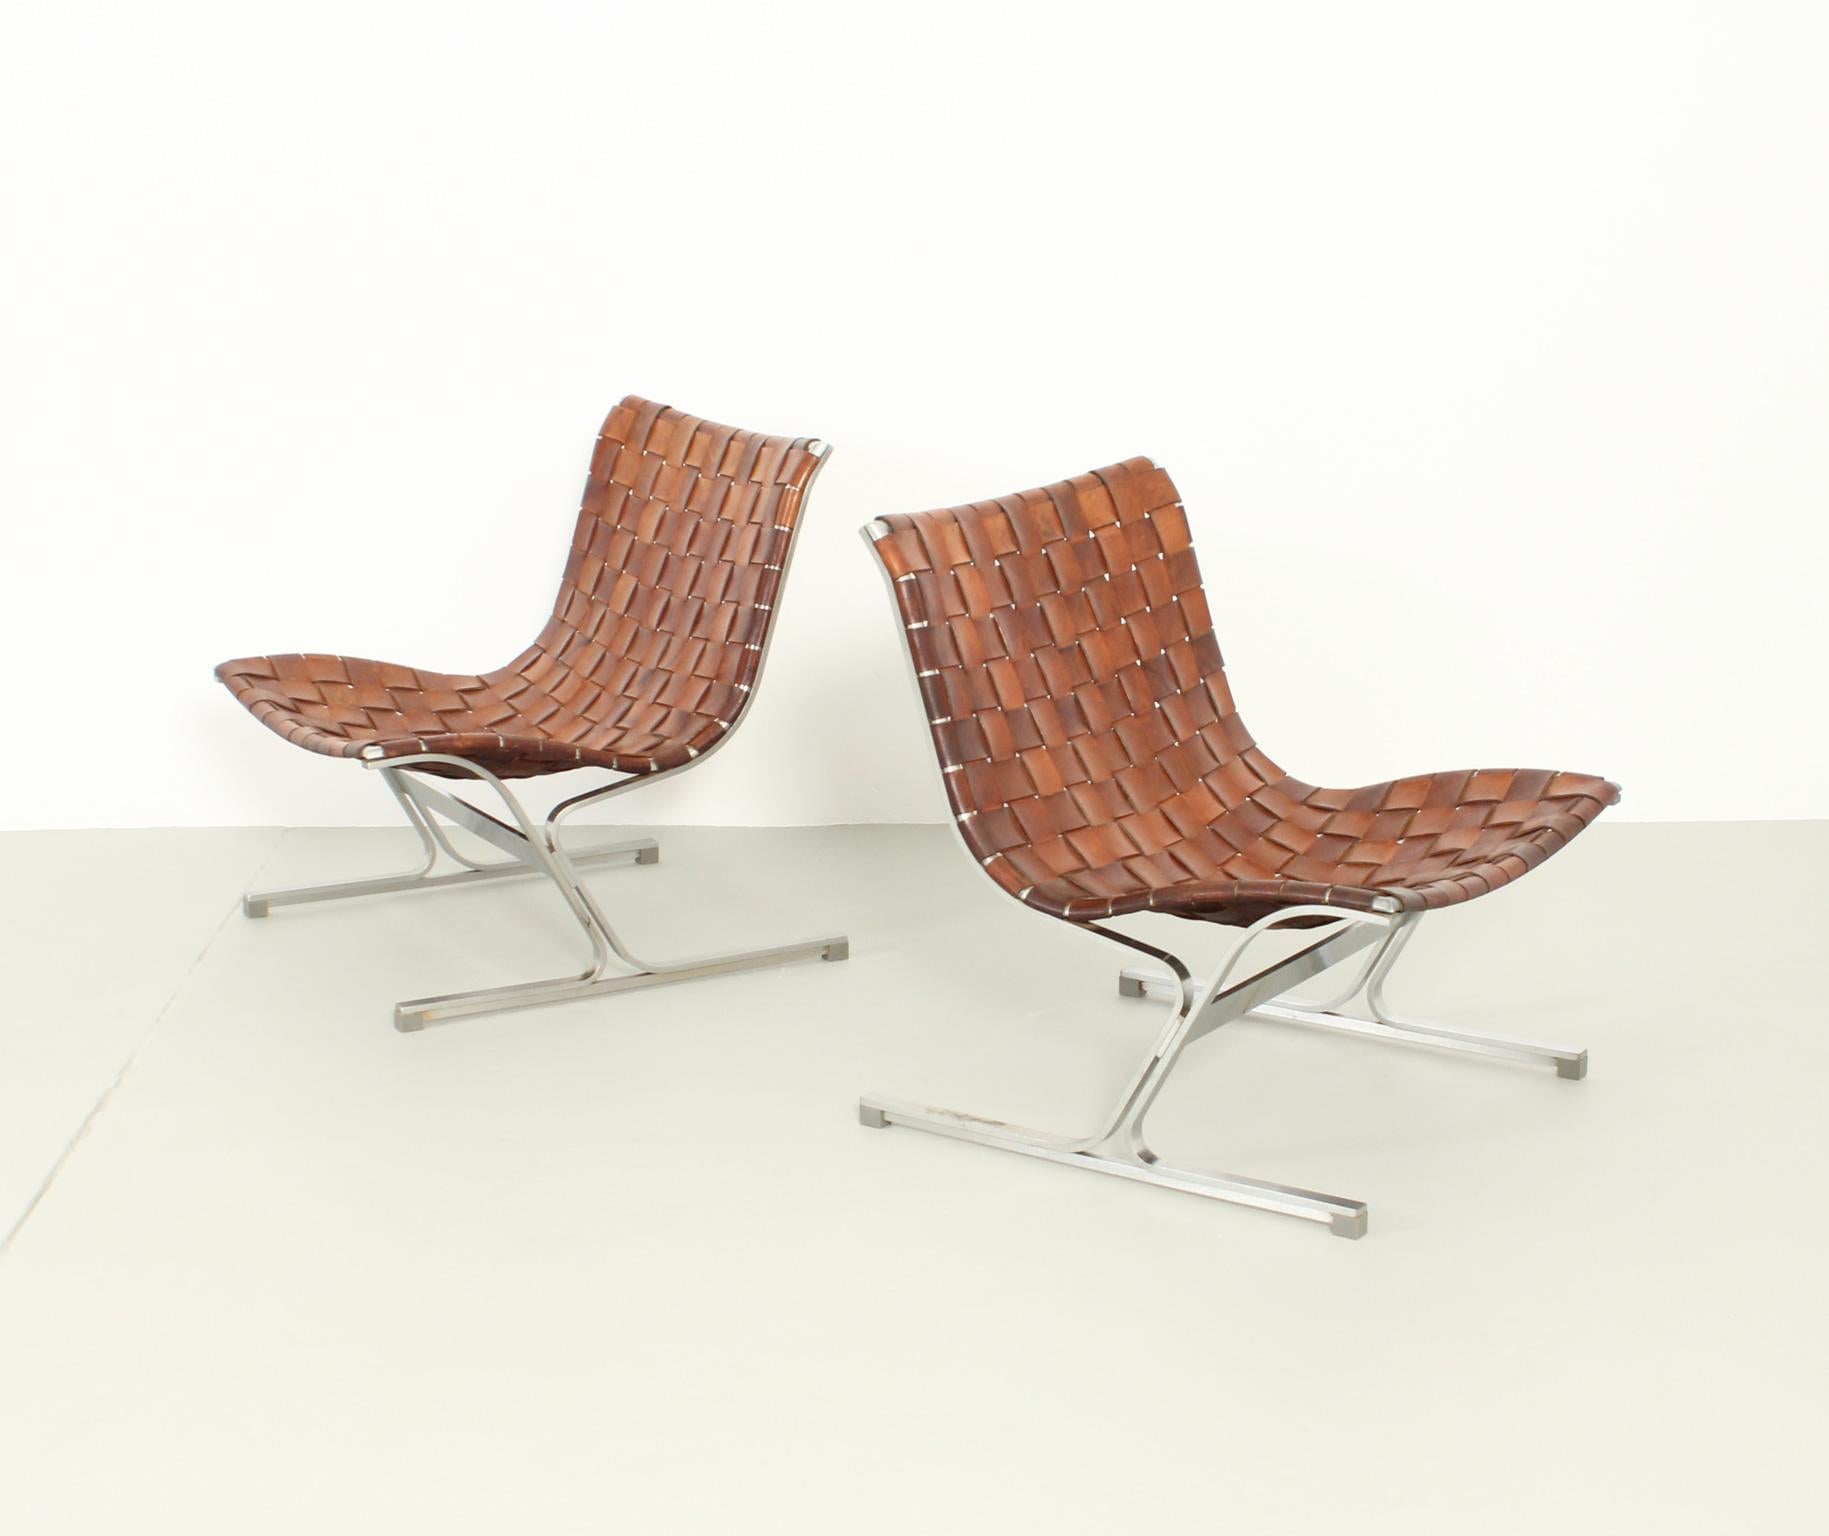 Pair of Luar lounge chairs designed in 1968 by the american designer Ross Littell for ICF Milano, italy. Early edition in polished steel and woven-leather seat.